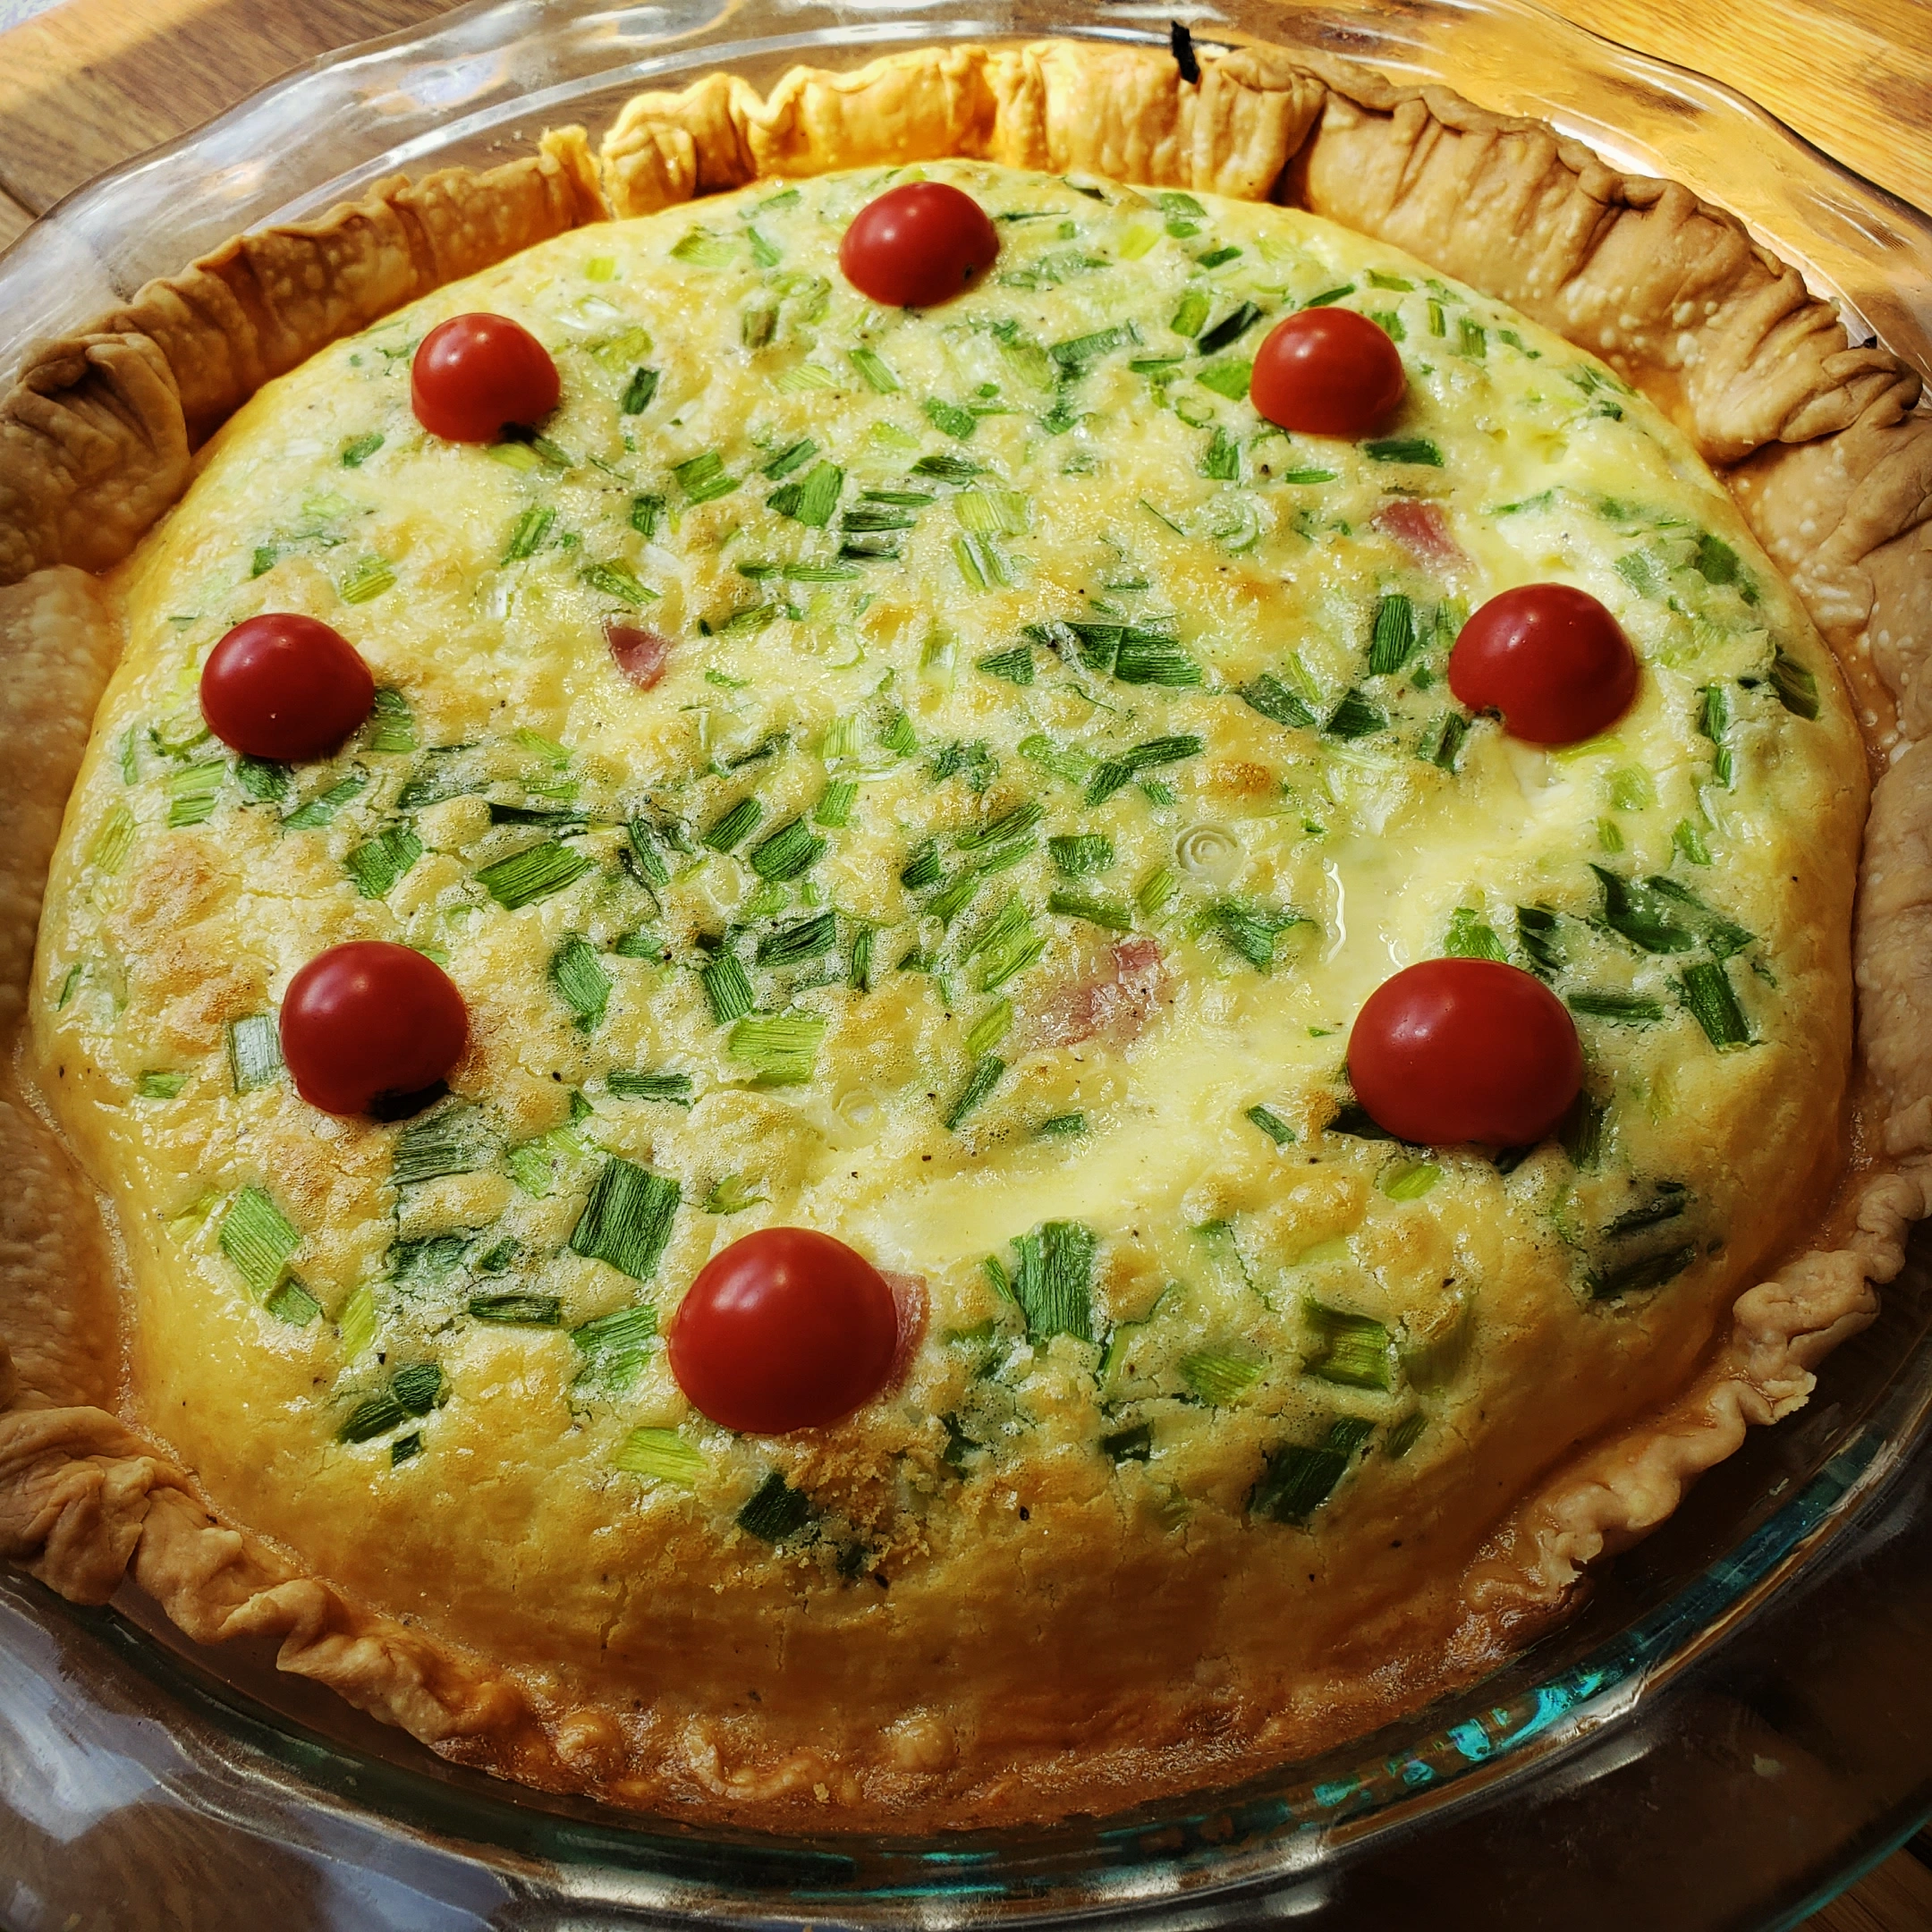 quiche in a pie pan, with green onions and cheery tomatoes on top